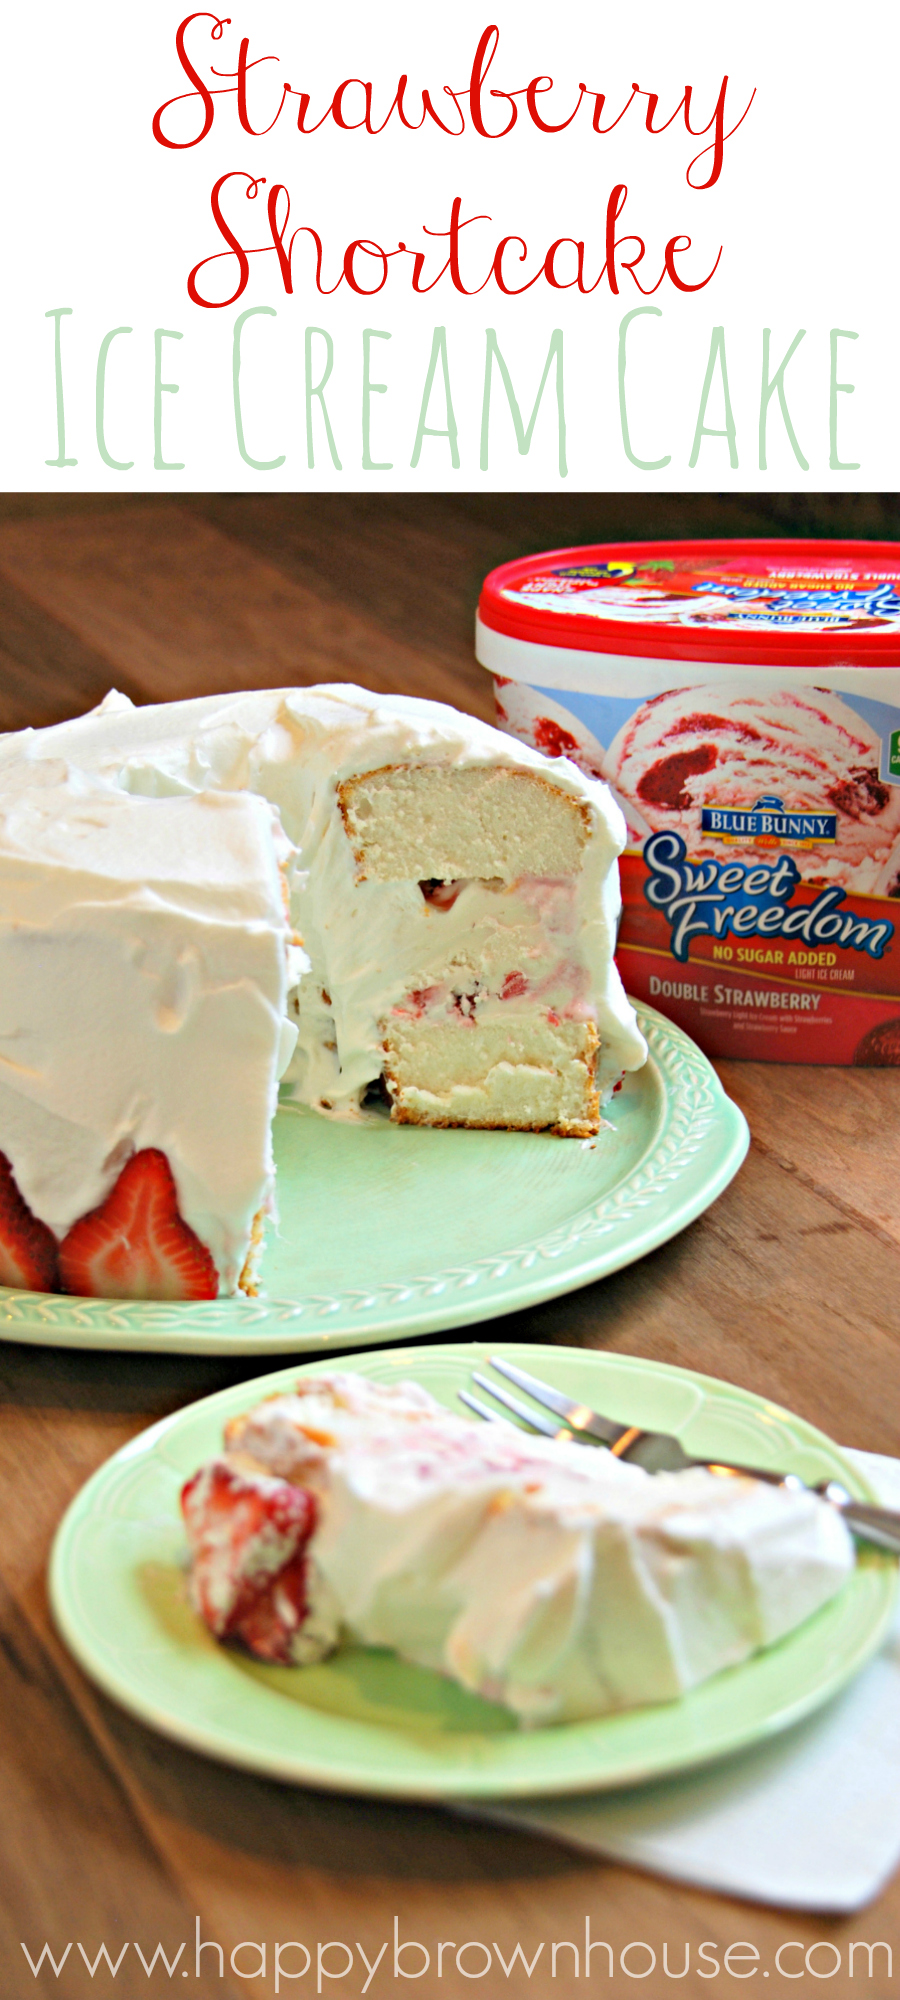 This Strawberry Shortcake Ice Cream Cake is easy to put together and will impress your guests. It's SOOOO good! #SunsOutSpoonsOut #CollectiveBias #ad